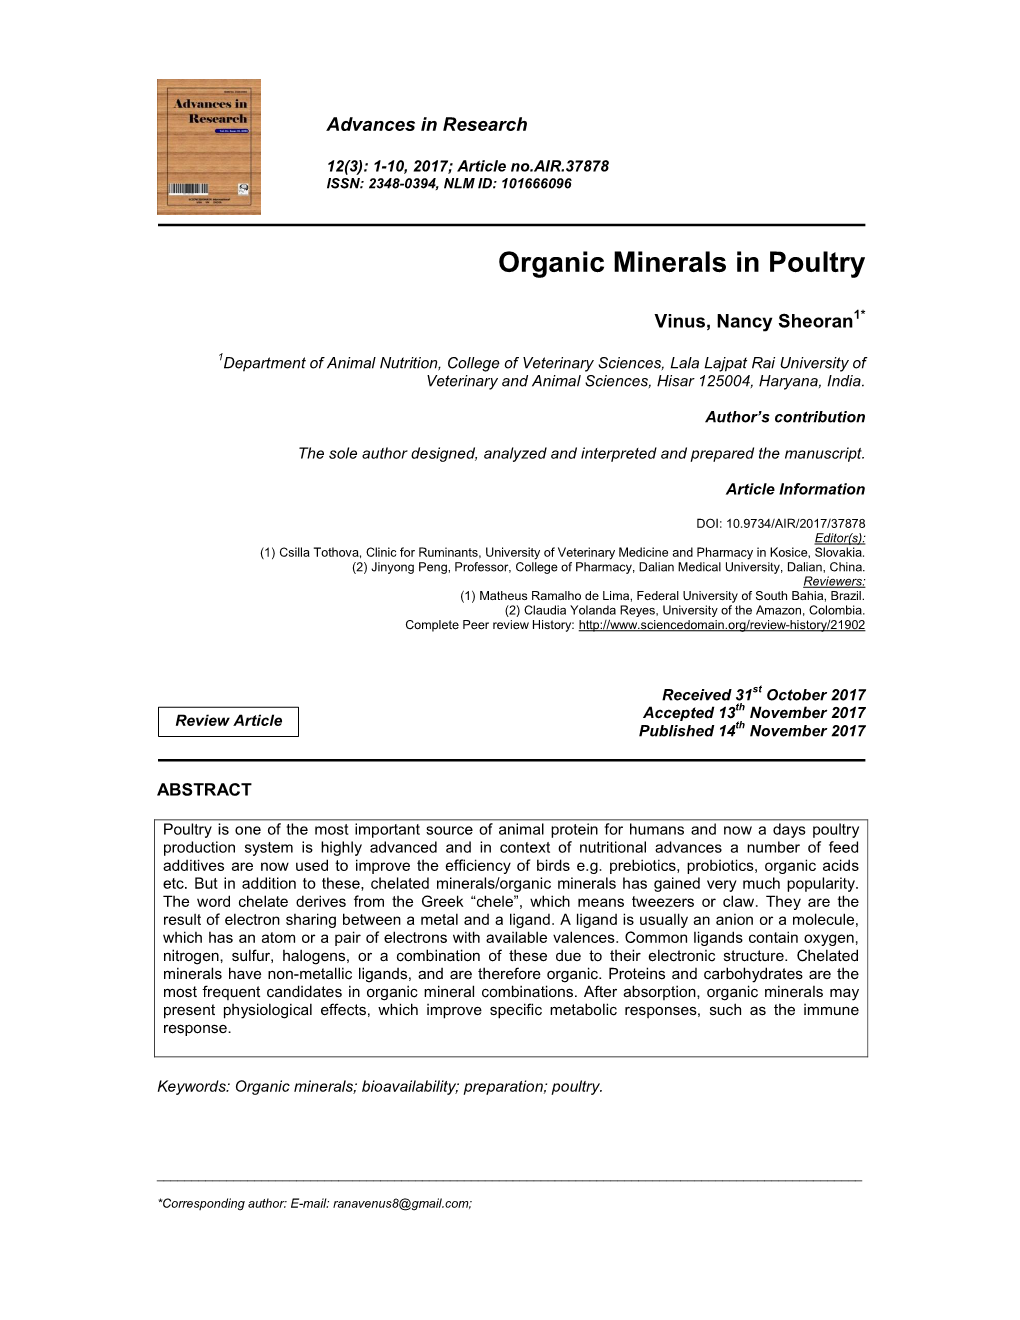 Organic Minerals in Poultry